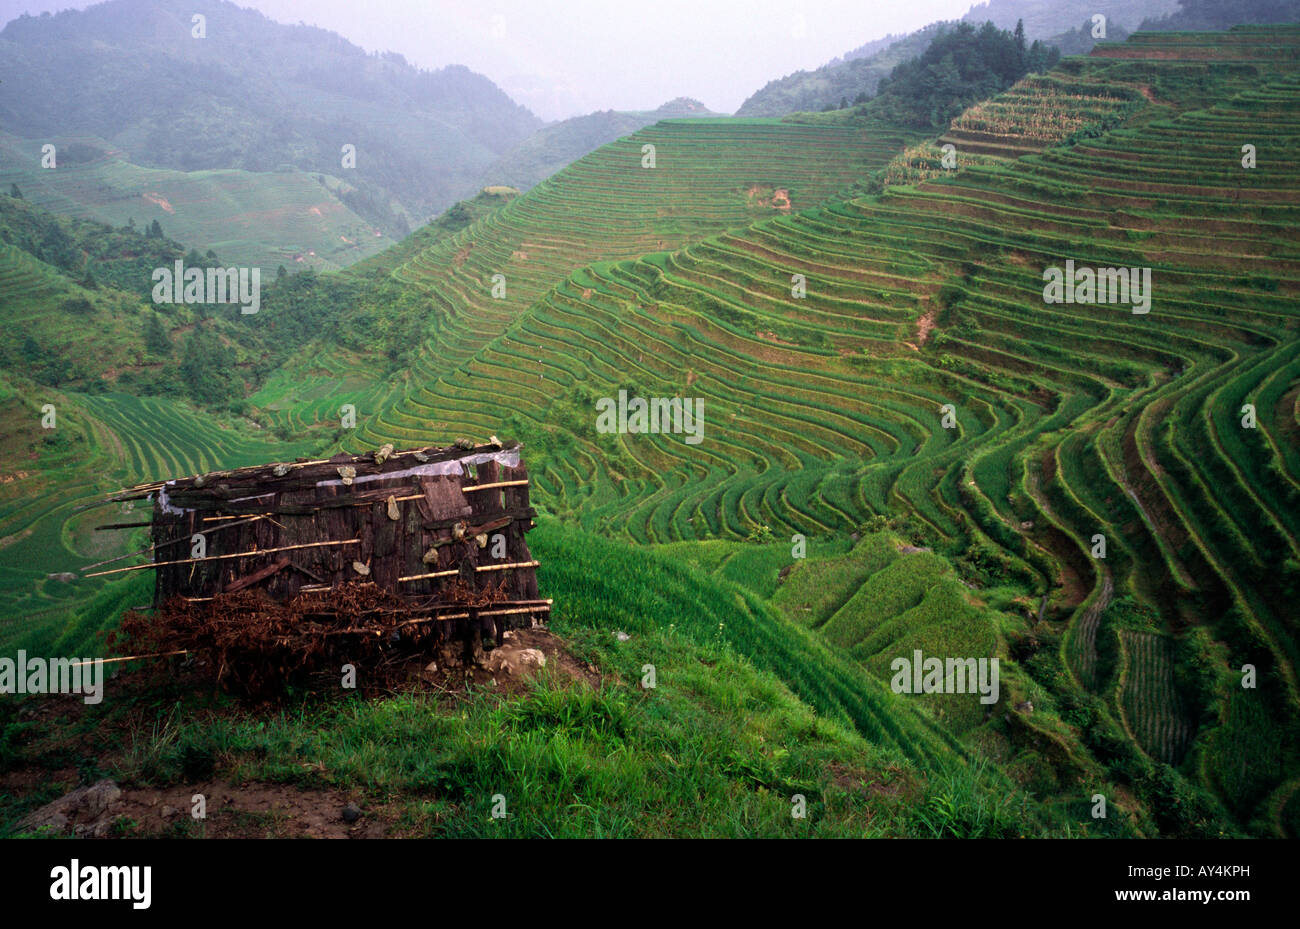 Aug 25, 2006 - The lesser known Jin Keng rice terraces near the the Dragon's Backbone in the Chinese province of Guangxi. Stock Photo